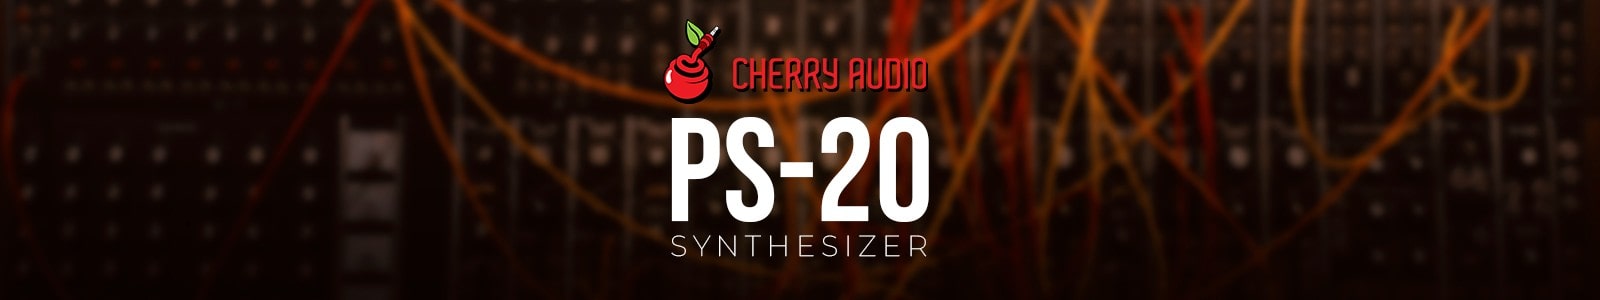 Cherry Audio PS-20 Synthesizer